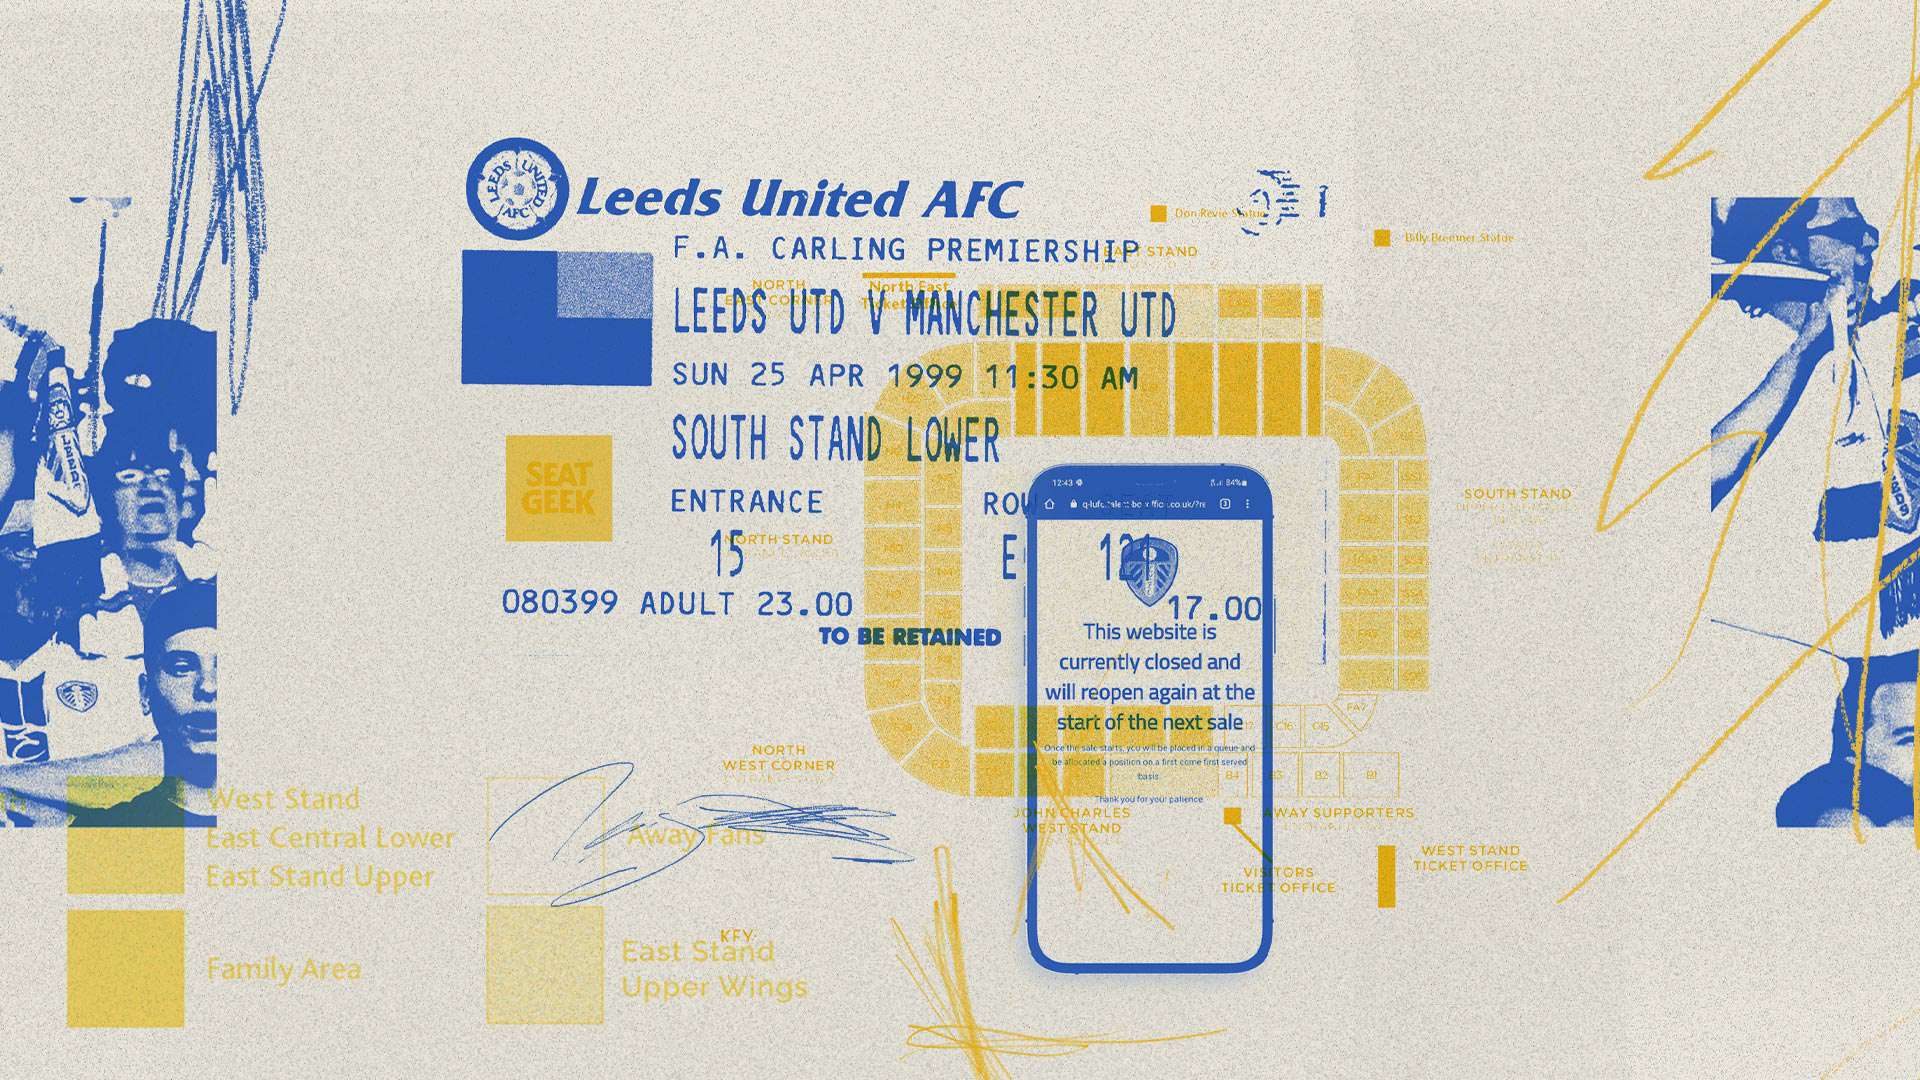 The highs and lows of buying Leeds tickets: a Scum ticket from 1999, and the familiar message the website has closed